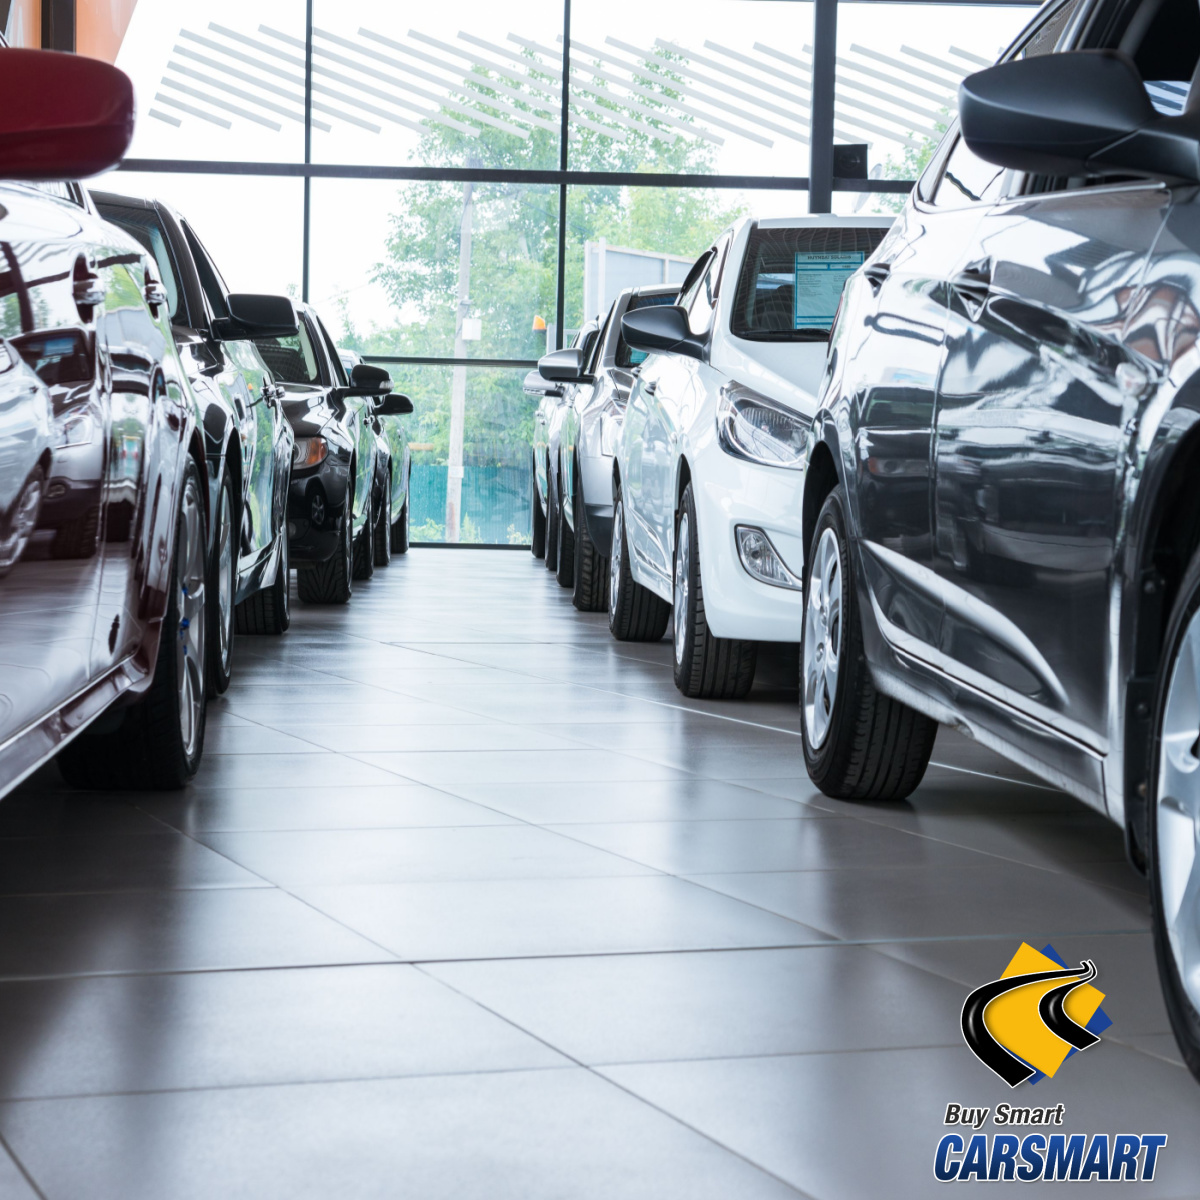 Finding a Great Car Dealer near Rosaryville is as Easy as Walking onto the CarSmart Lot!